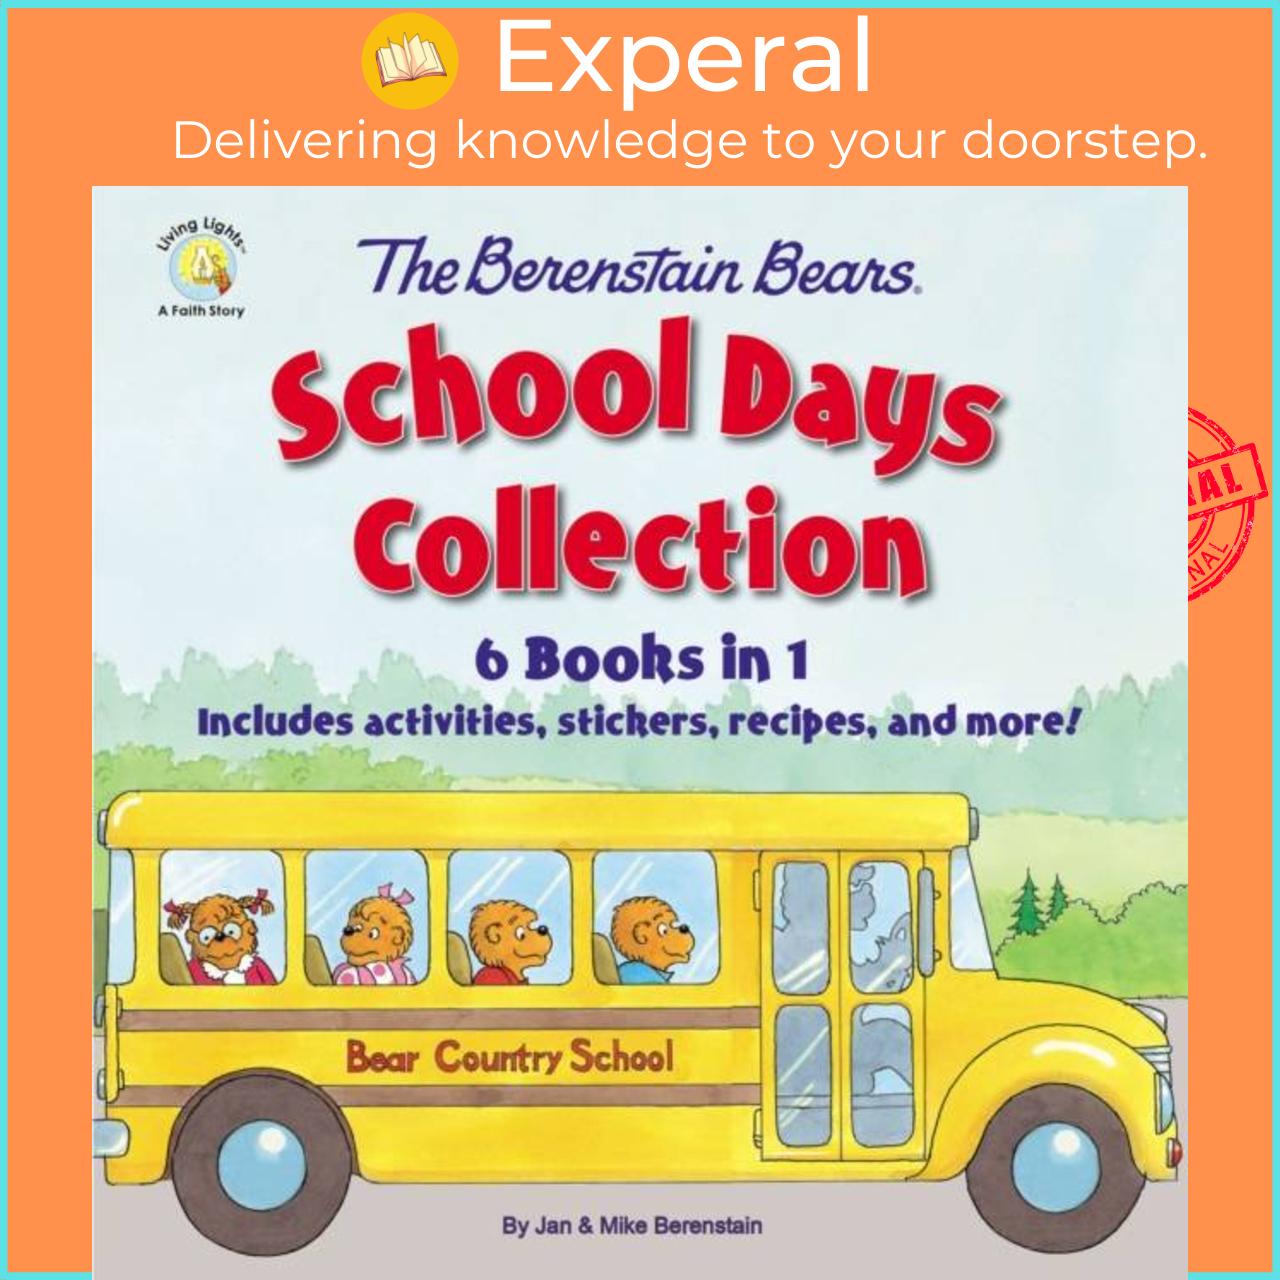 Hình ảnh Sách - The Berenstain Bears School Days Collection - 6 Books in 1, Includes a by Mike Berenstain (UK edition, hardcover)